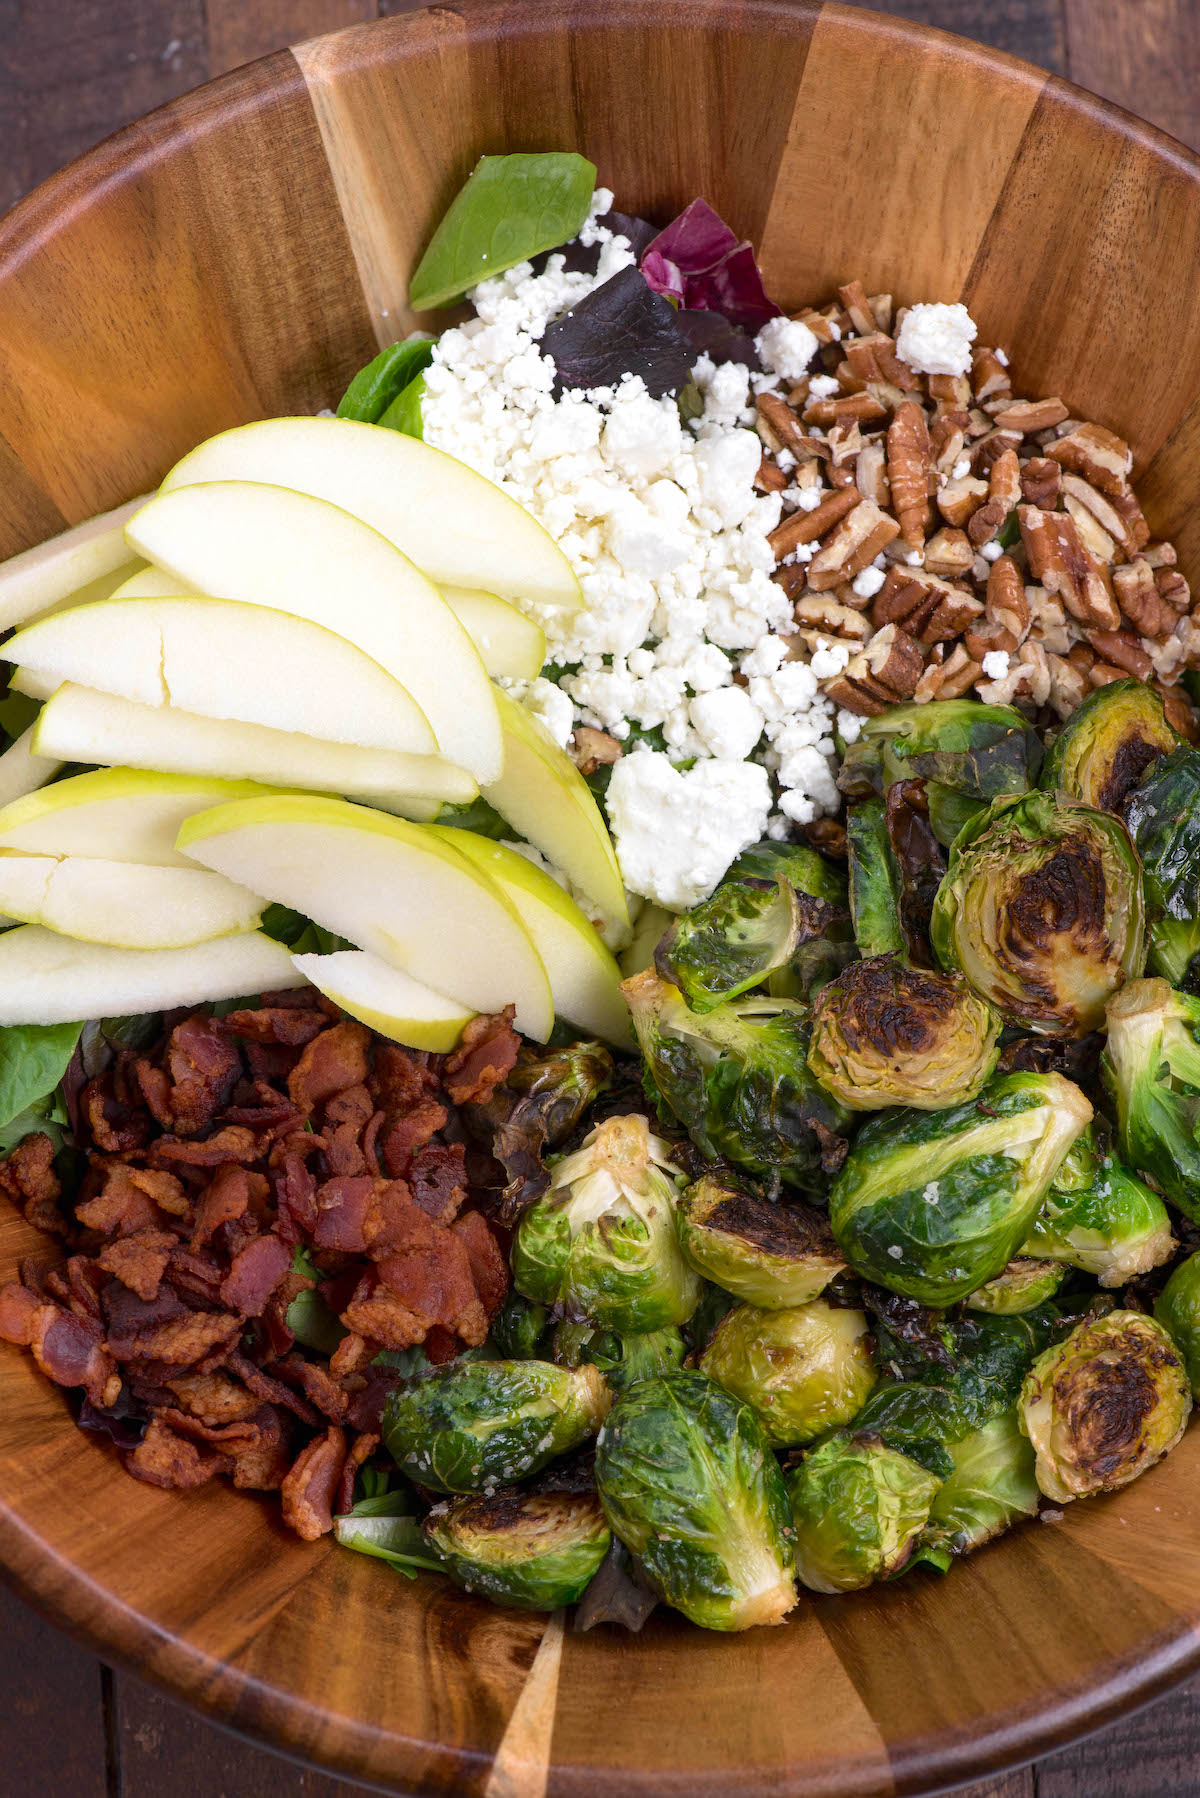 brussel sprout salad with all the ingredients including apples, Brussel sprouts, cheese, and bacon separated in a wooden bowl